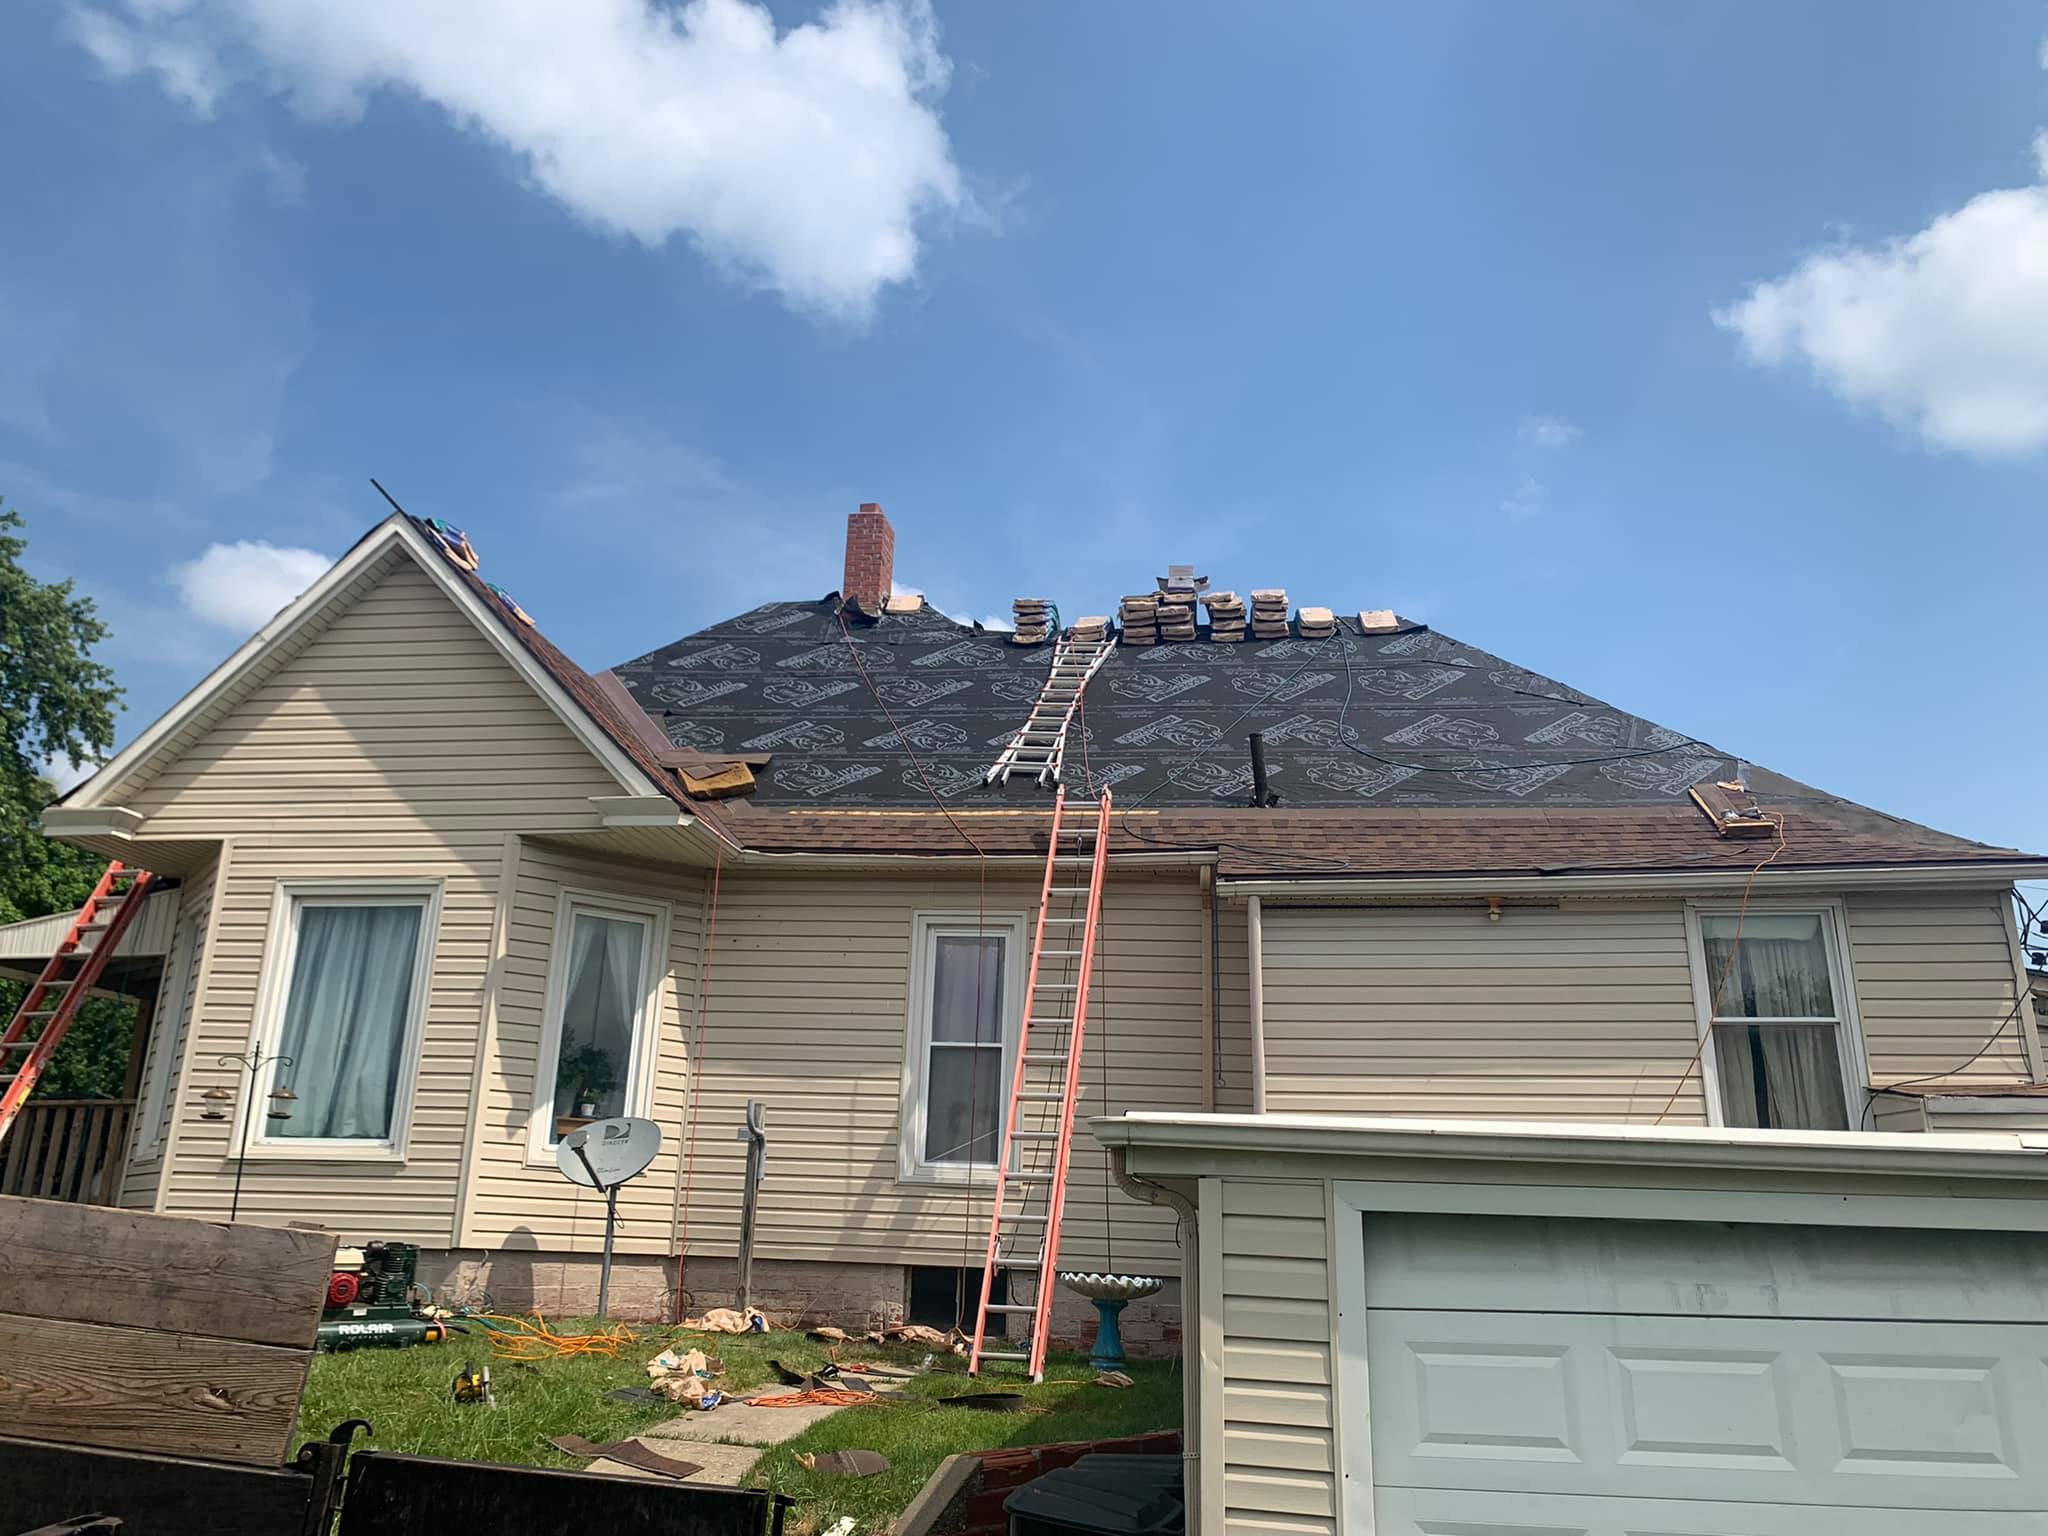 Roofing Companies Near Liberty Missouri - Tips For Choosing The Right One